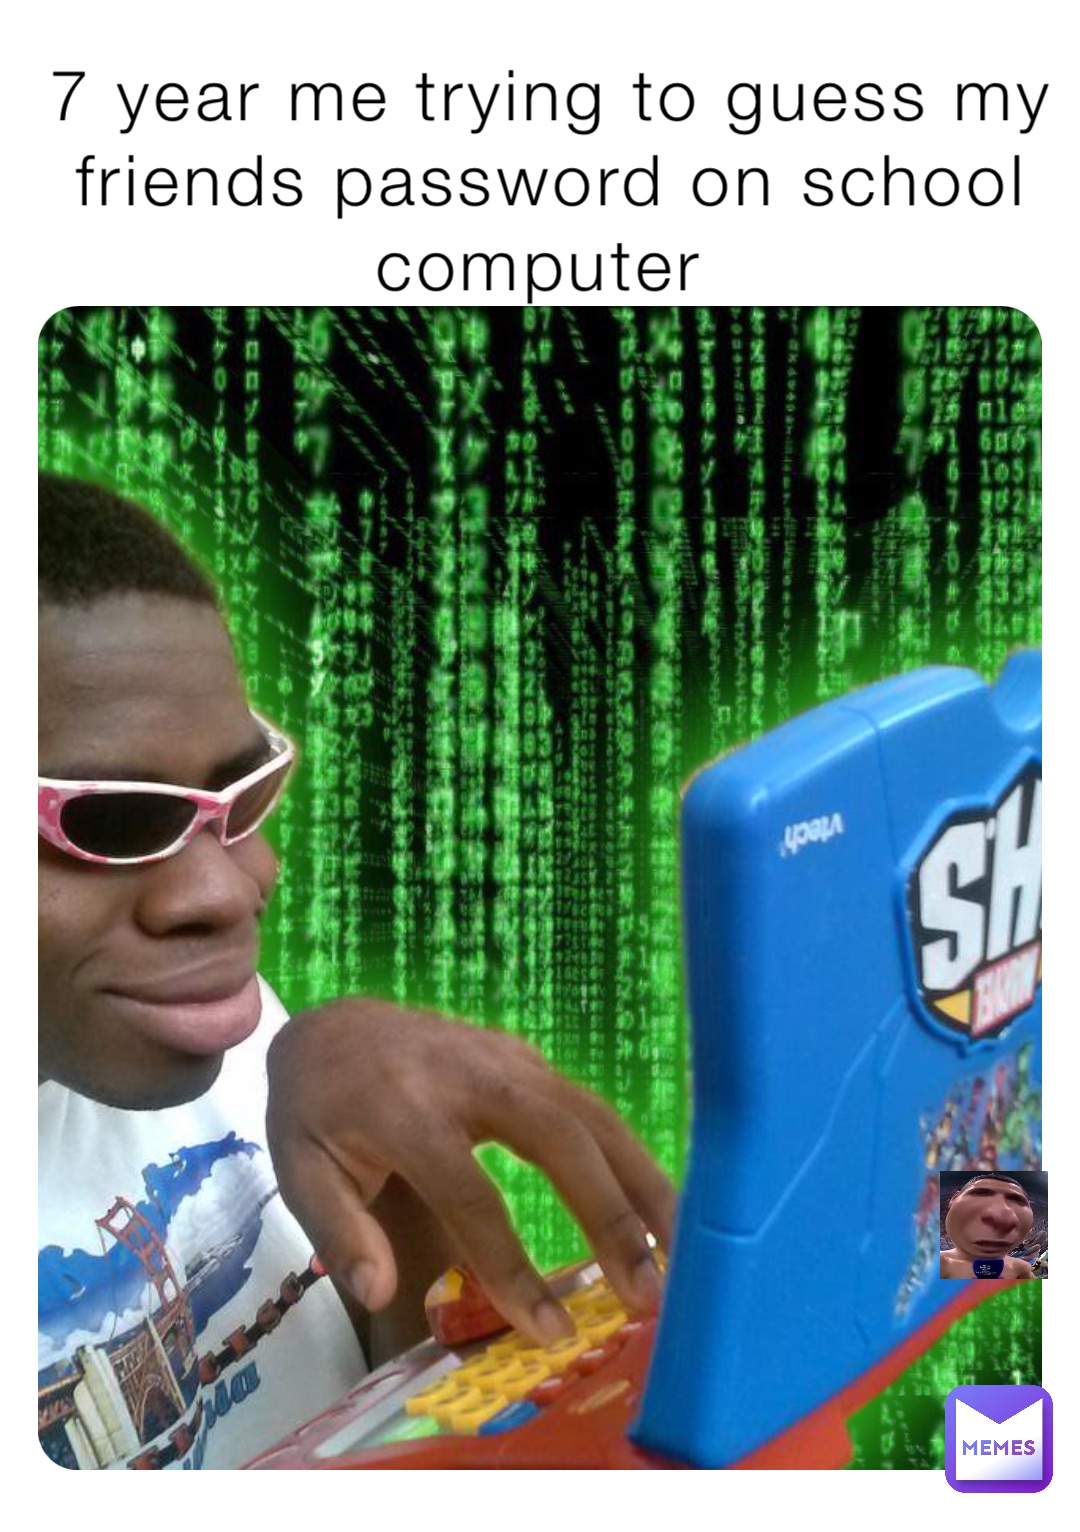 7 year me trying to guess my friends password on school computer